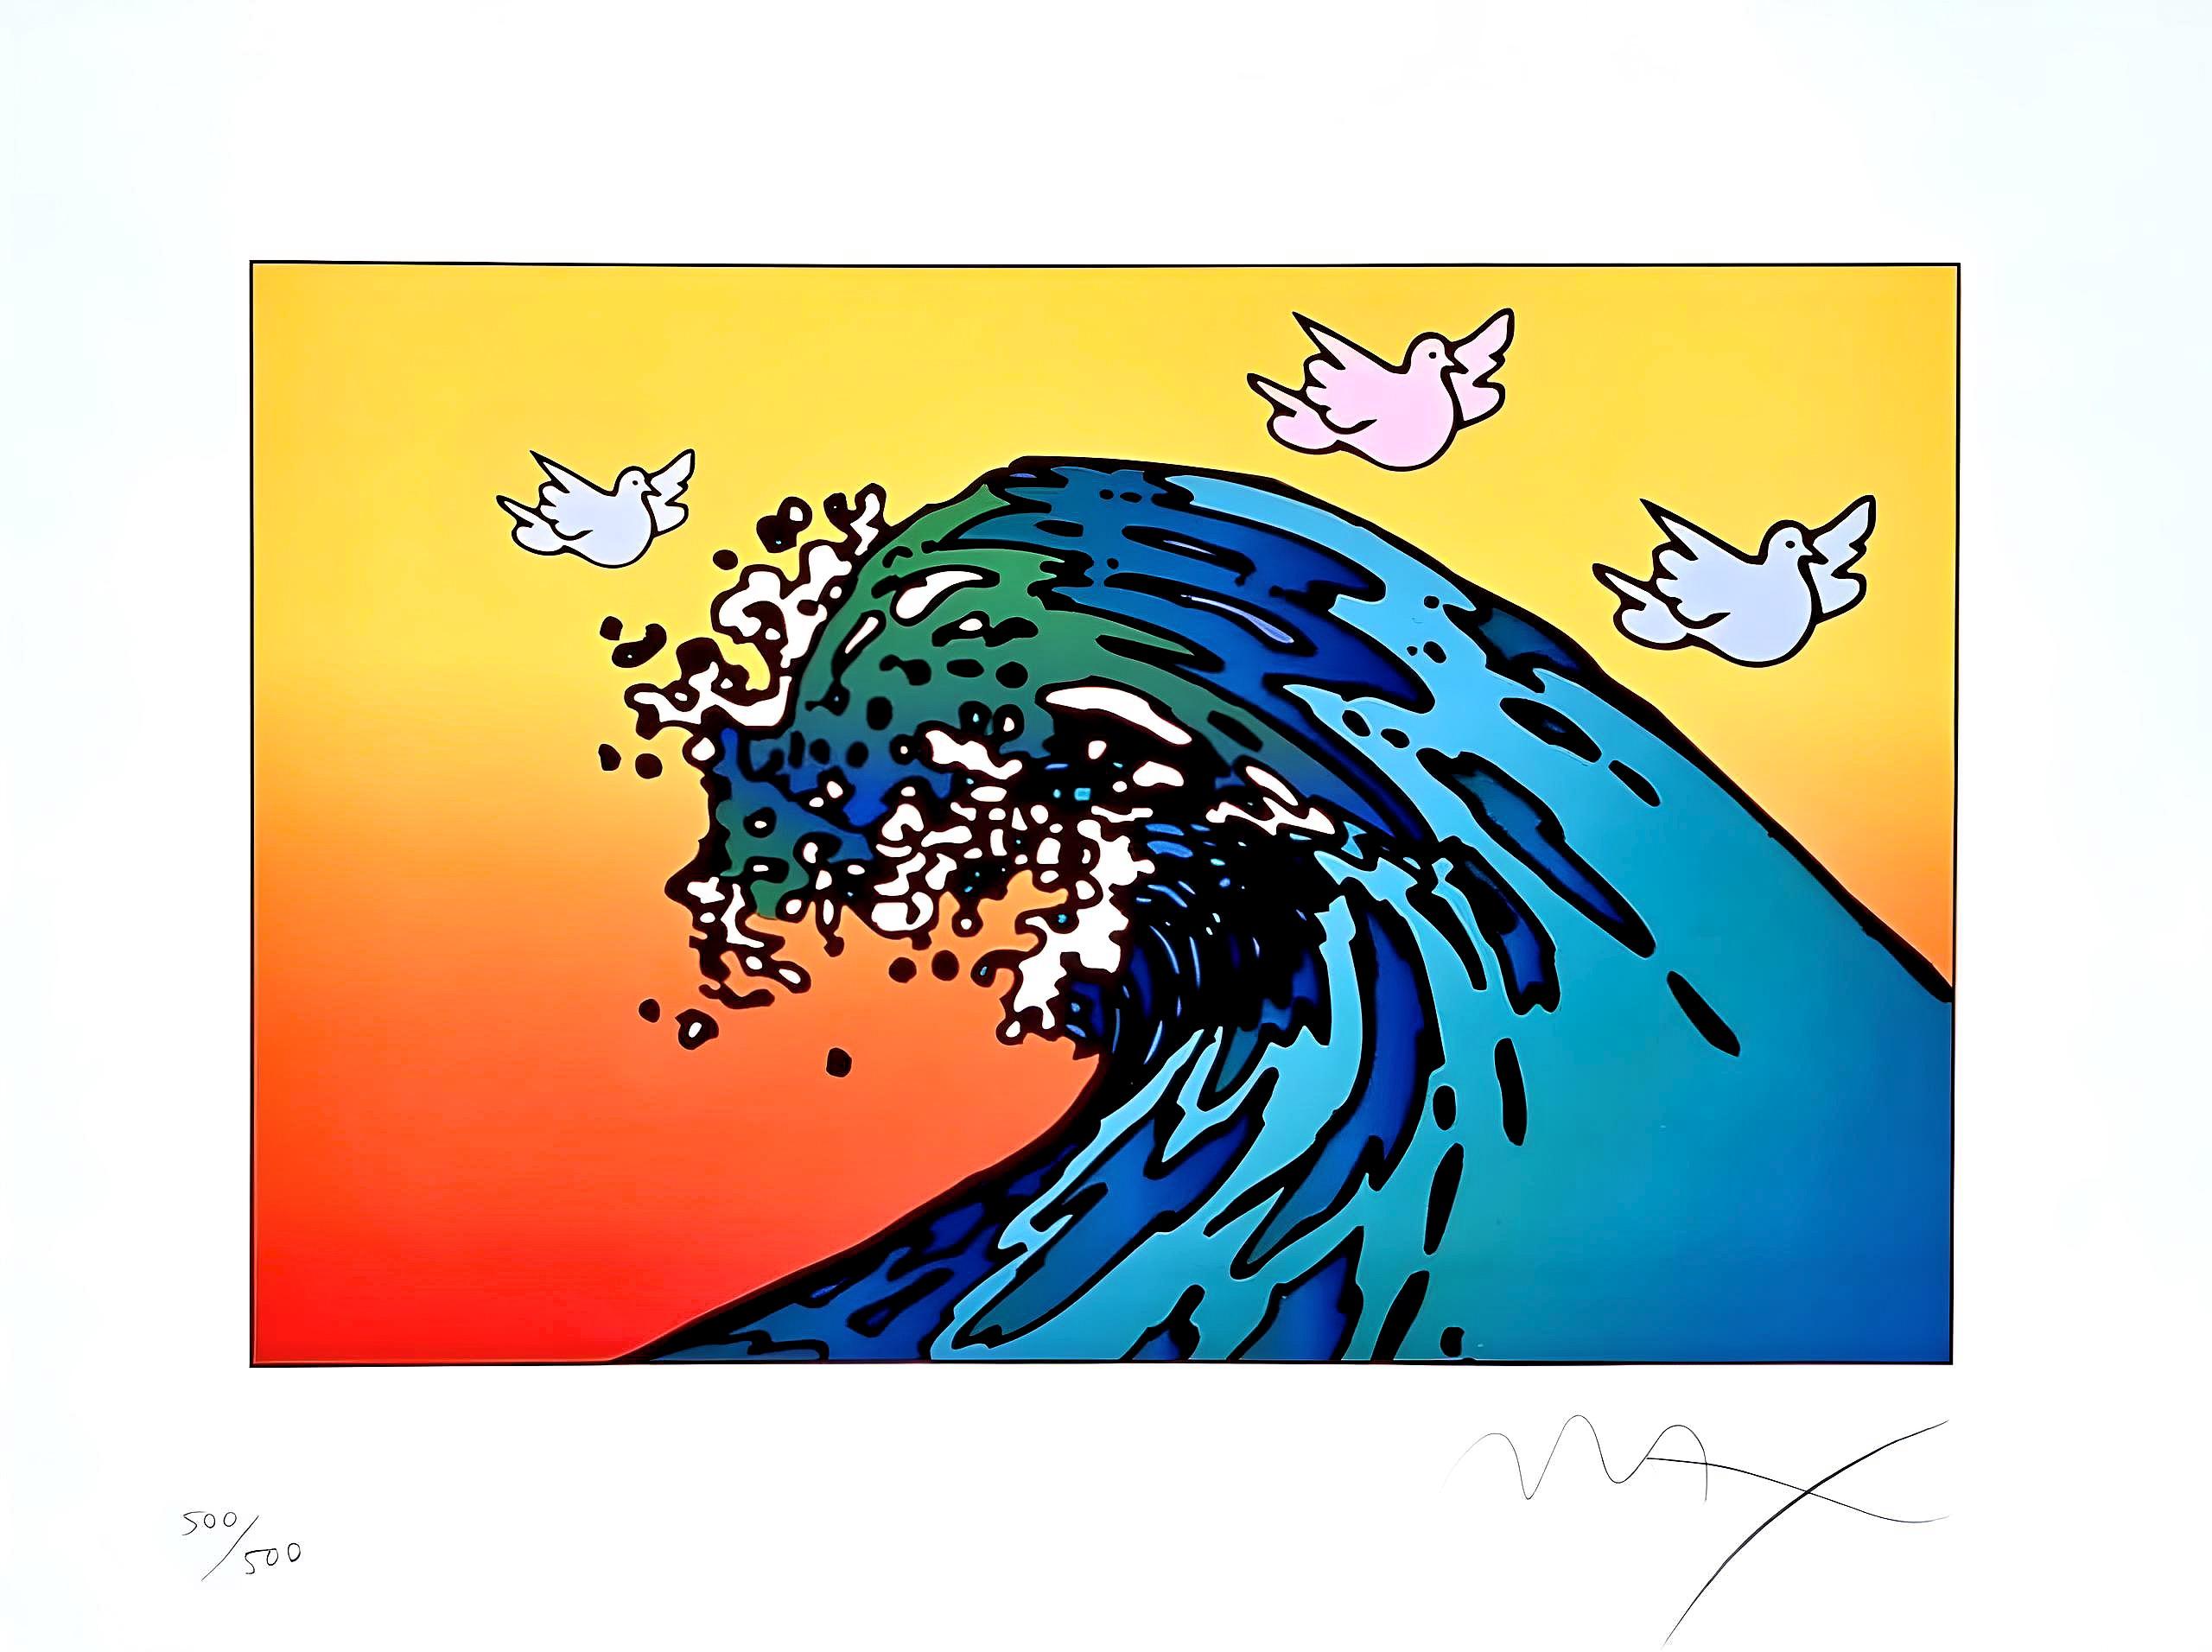 Protect Our Planet Ver. II, Peter Max 6